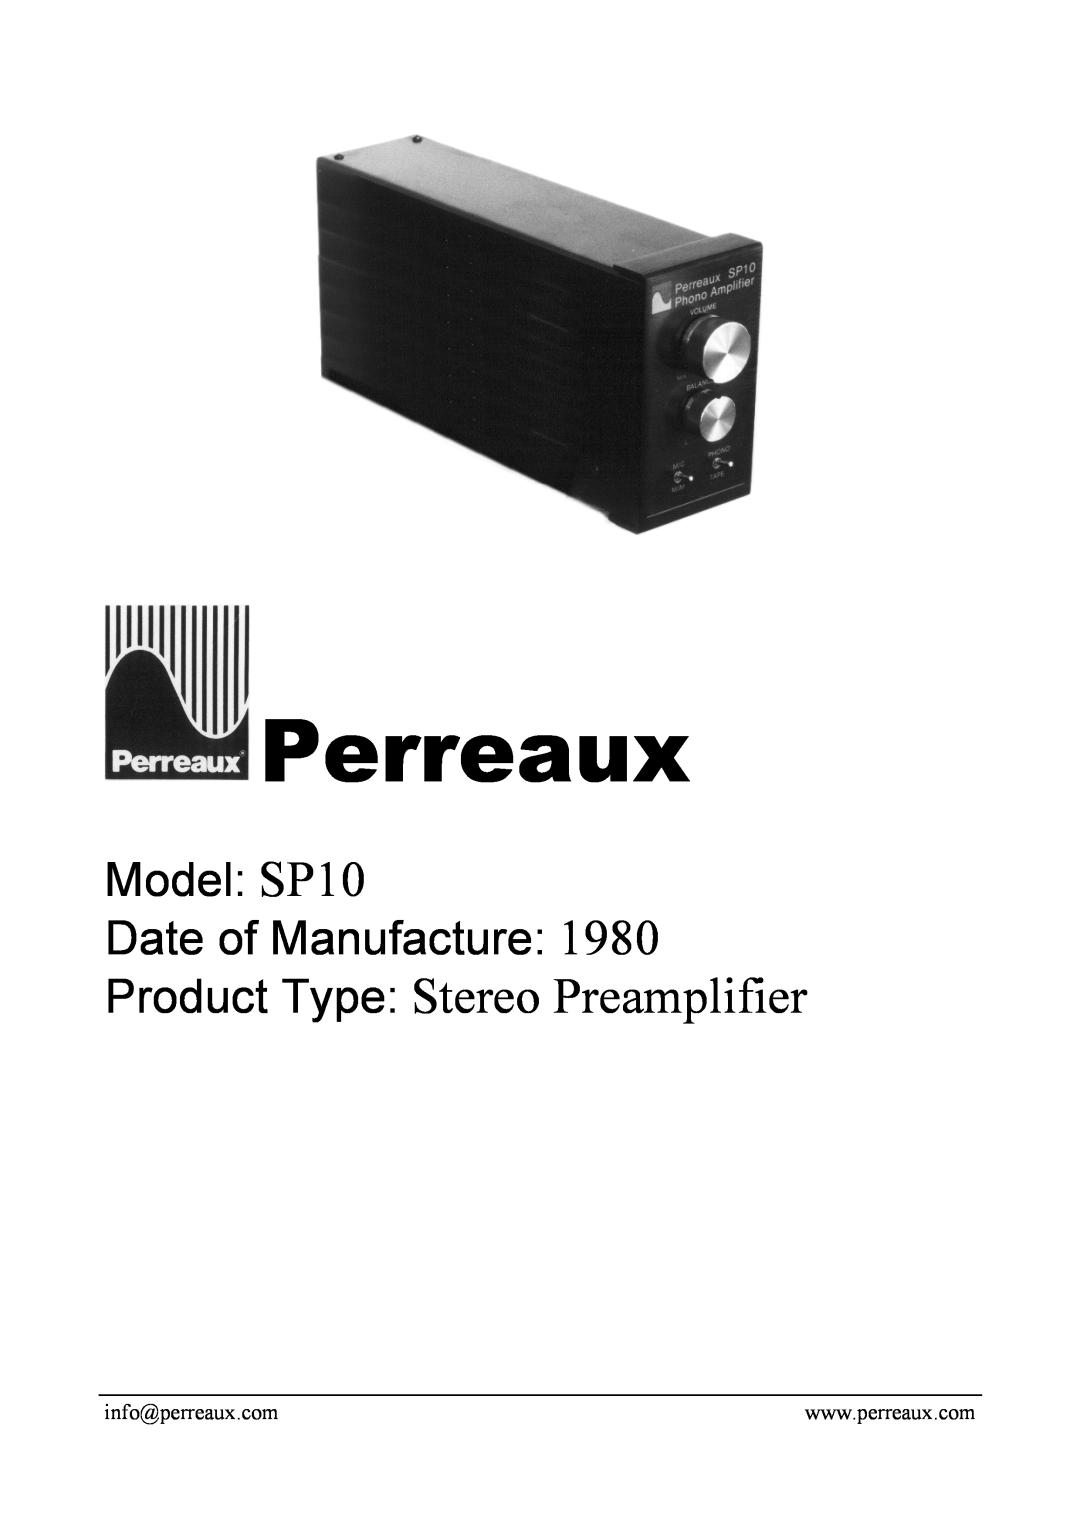 Perreaux manual Perreaux, Product Type Stereo Preamplifier, Model SP10 Date of Manufacture 